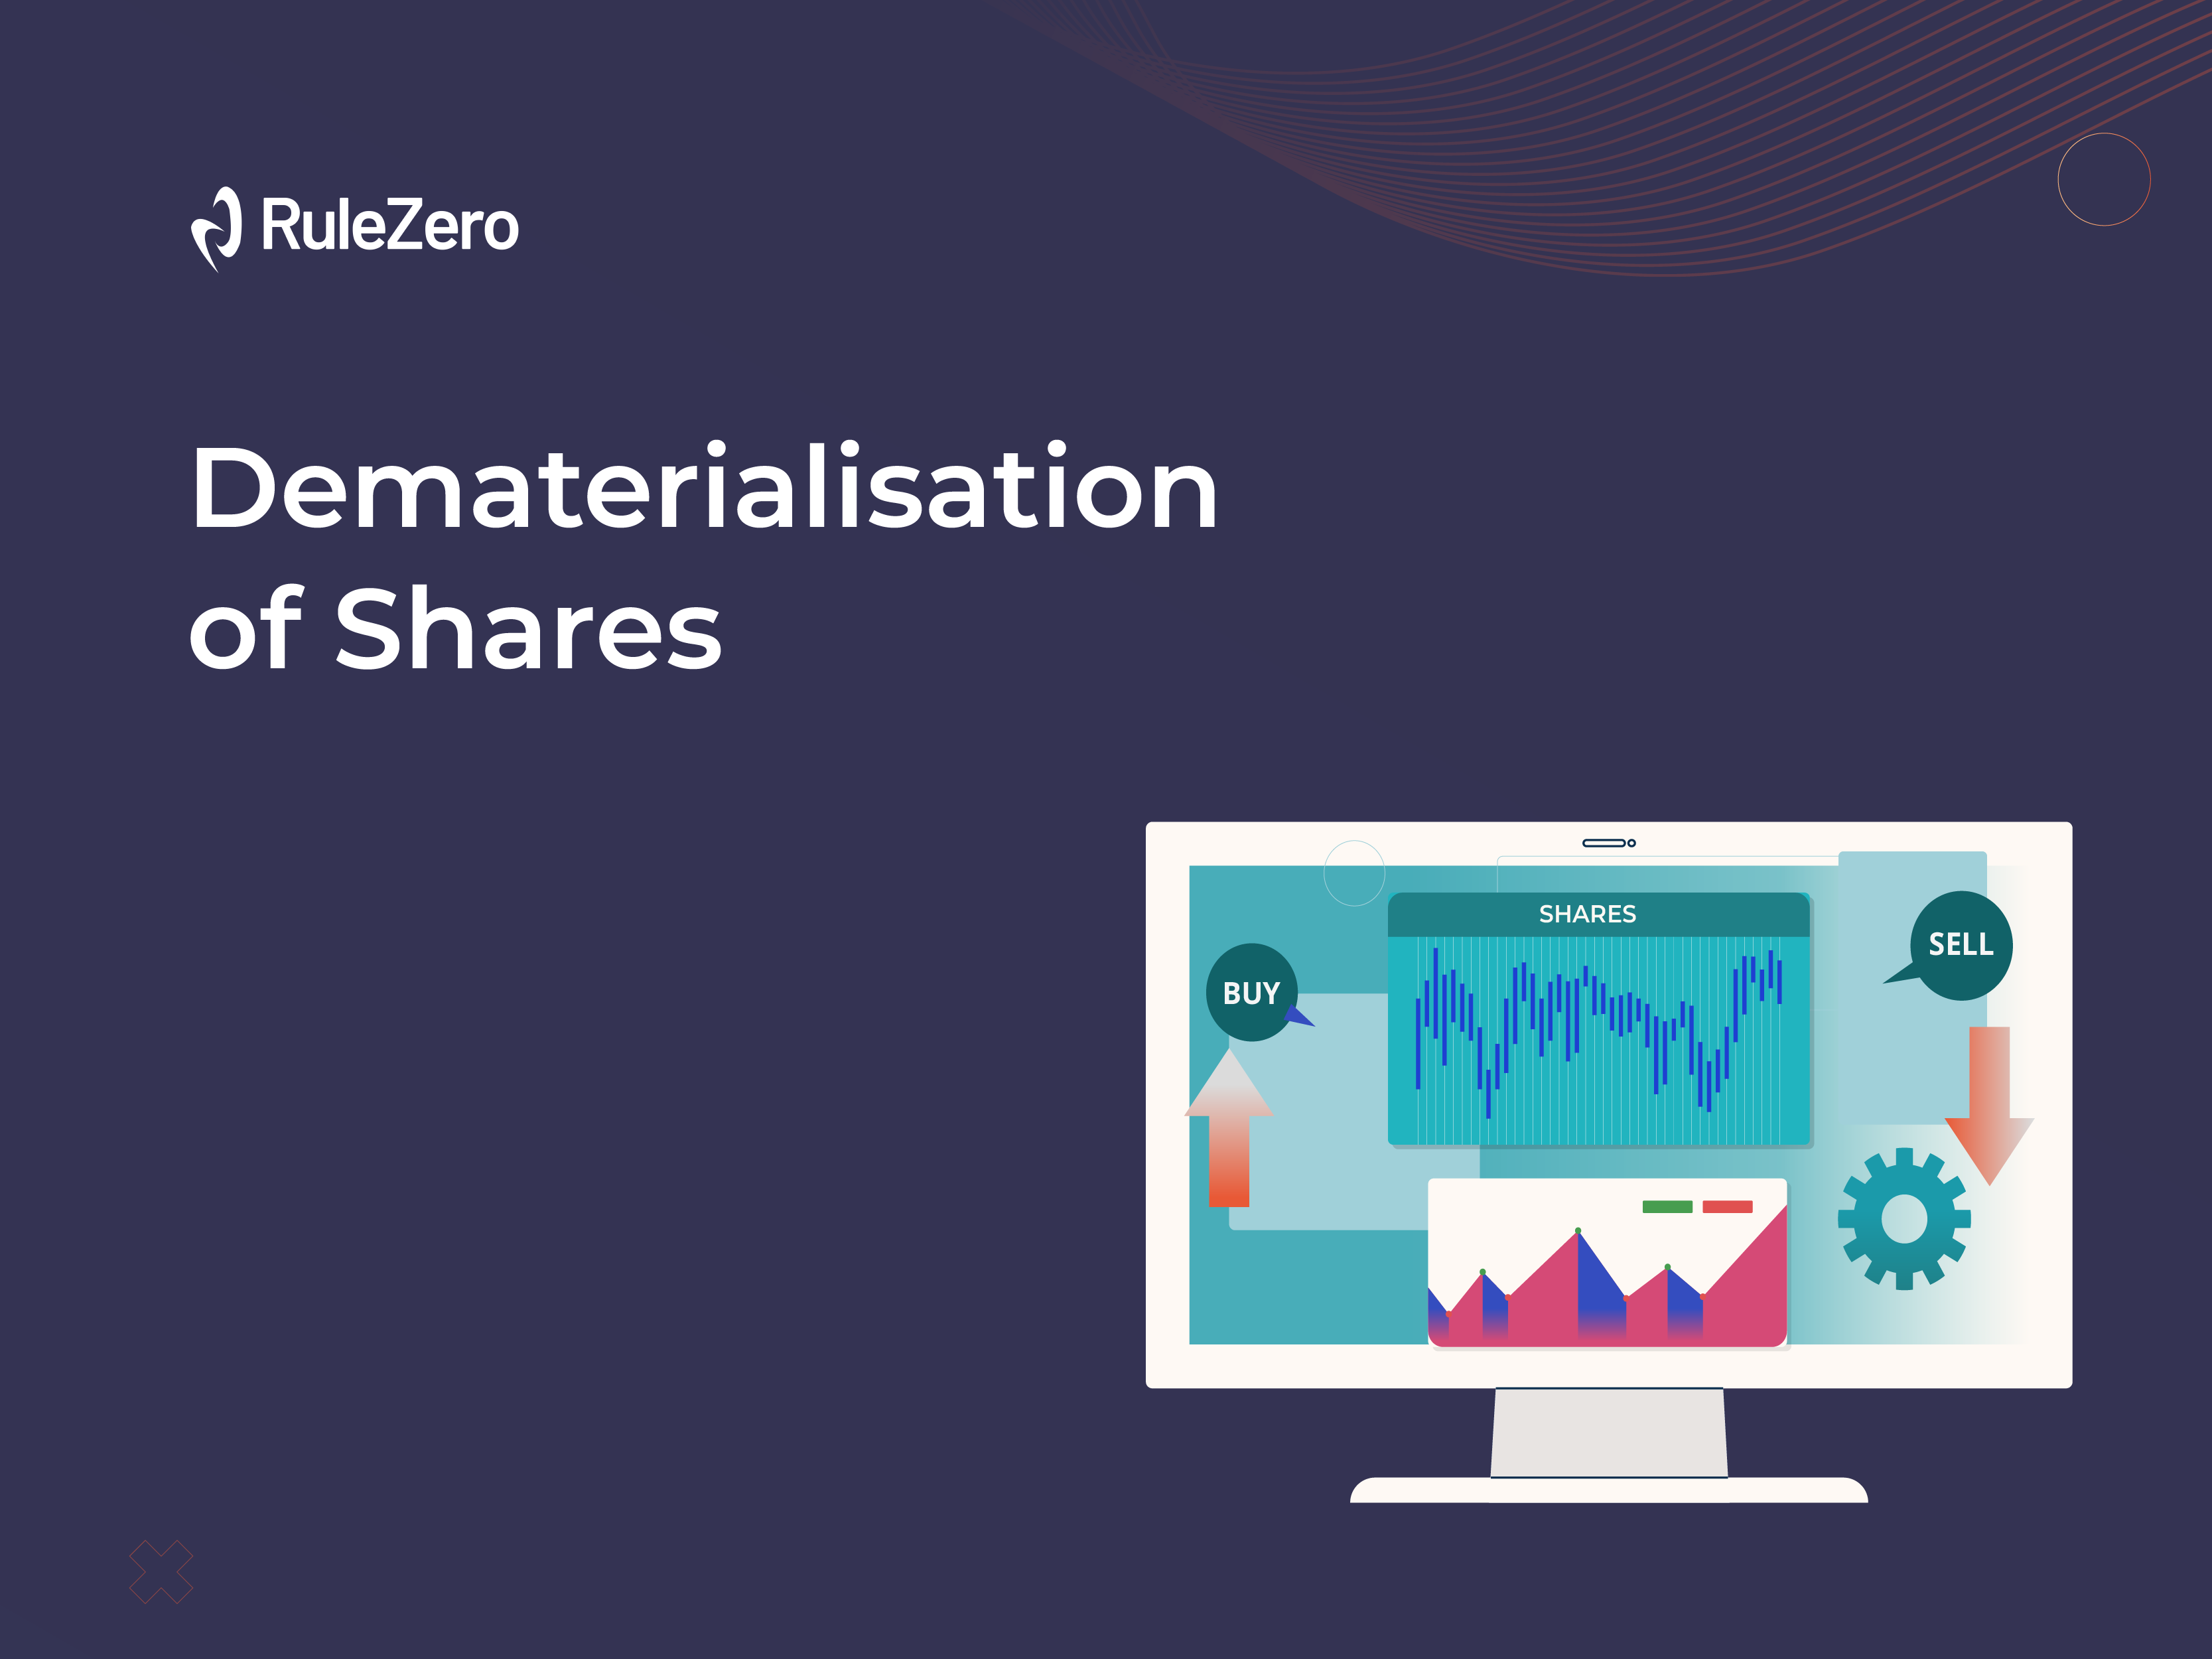 Dematerialisation of shares